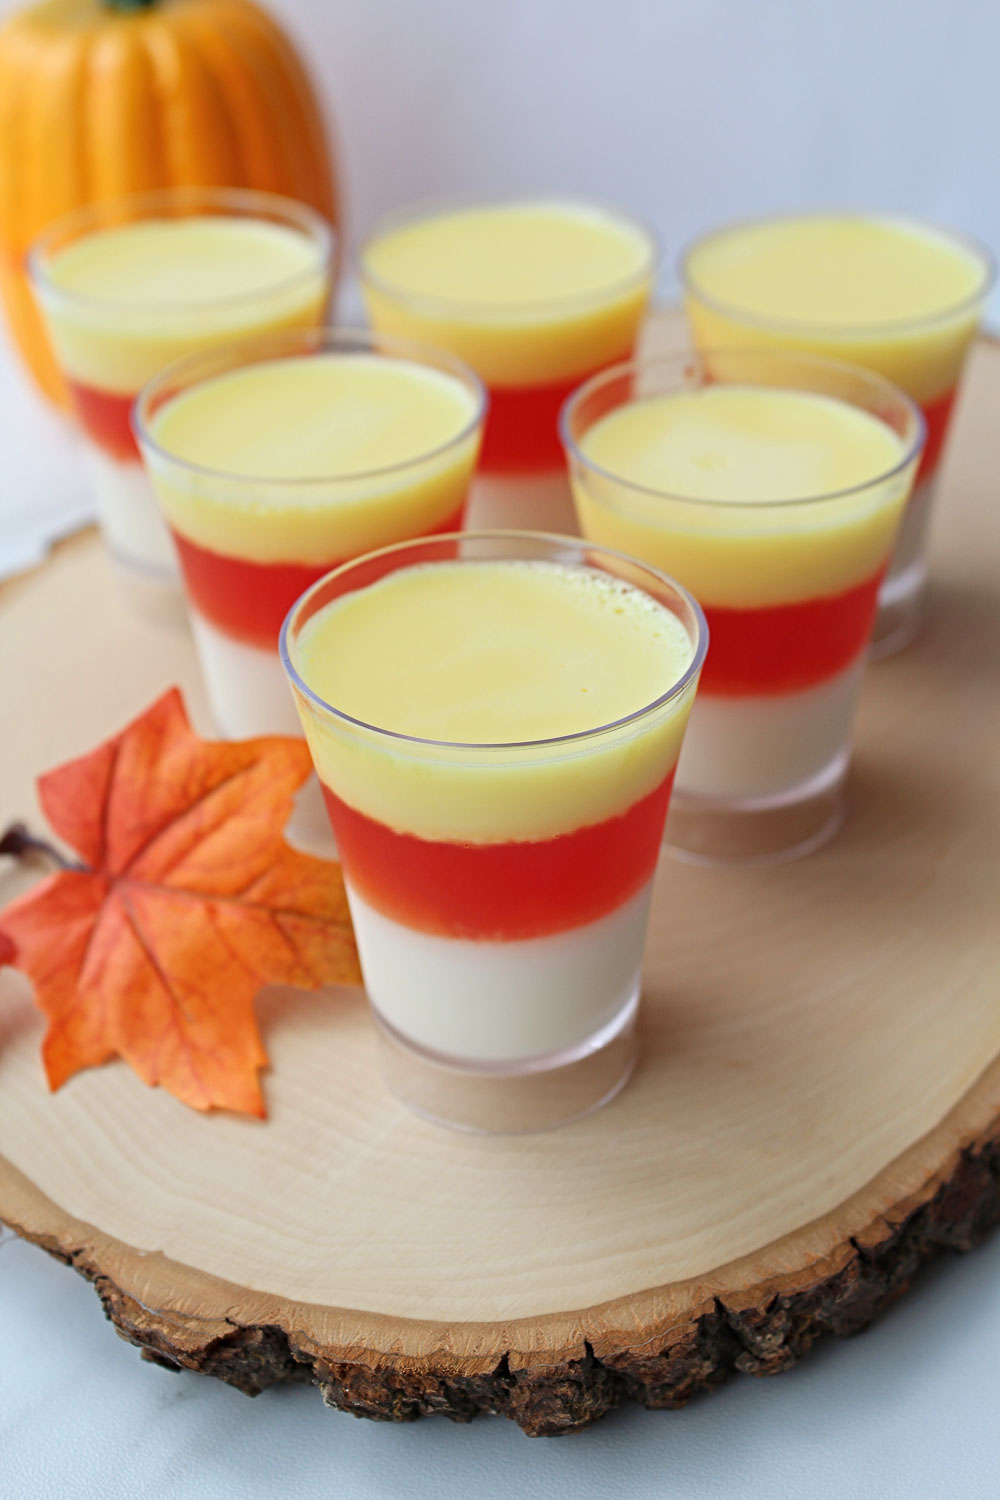 Fun, incredibly easy, and delicious; these candy corn Jello shots with Vodka make a tasty treat for your next Halloween. Not to mention that it's a hit with kids (be sure to skip the alcohol) and grown-ups (hello, Vodka jello shots!).